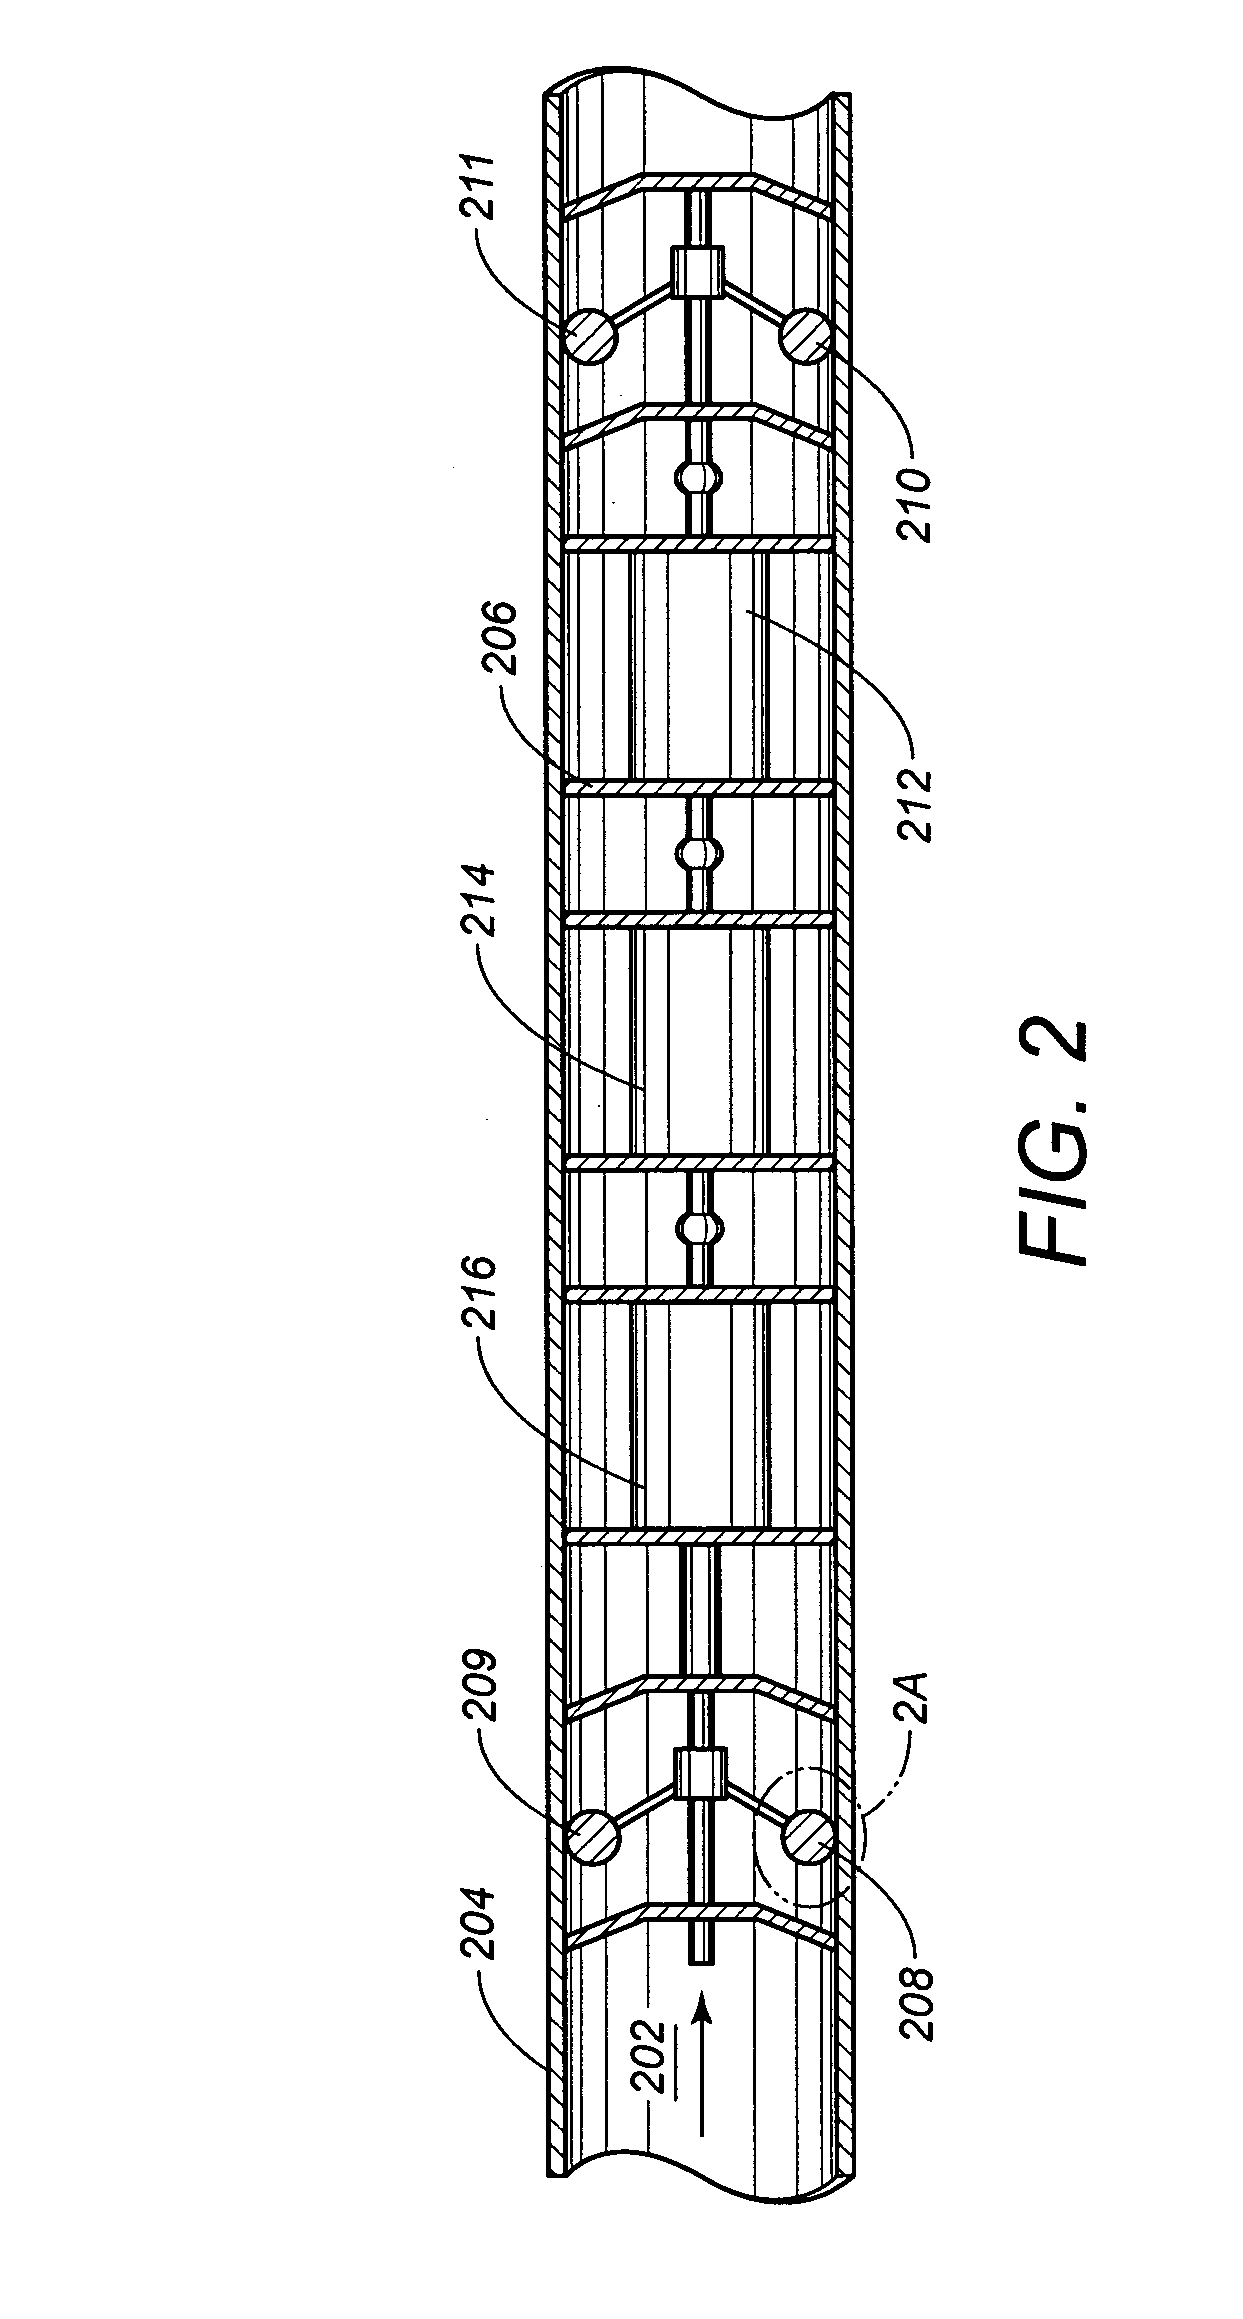 System and method for measuring electric current in a pipeline